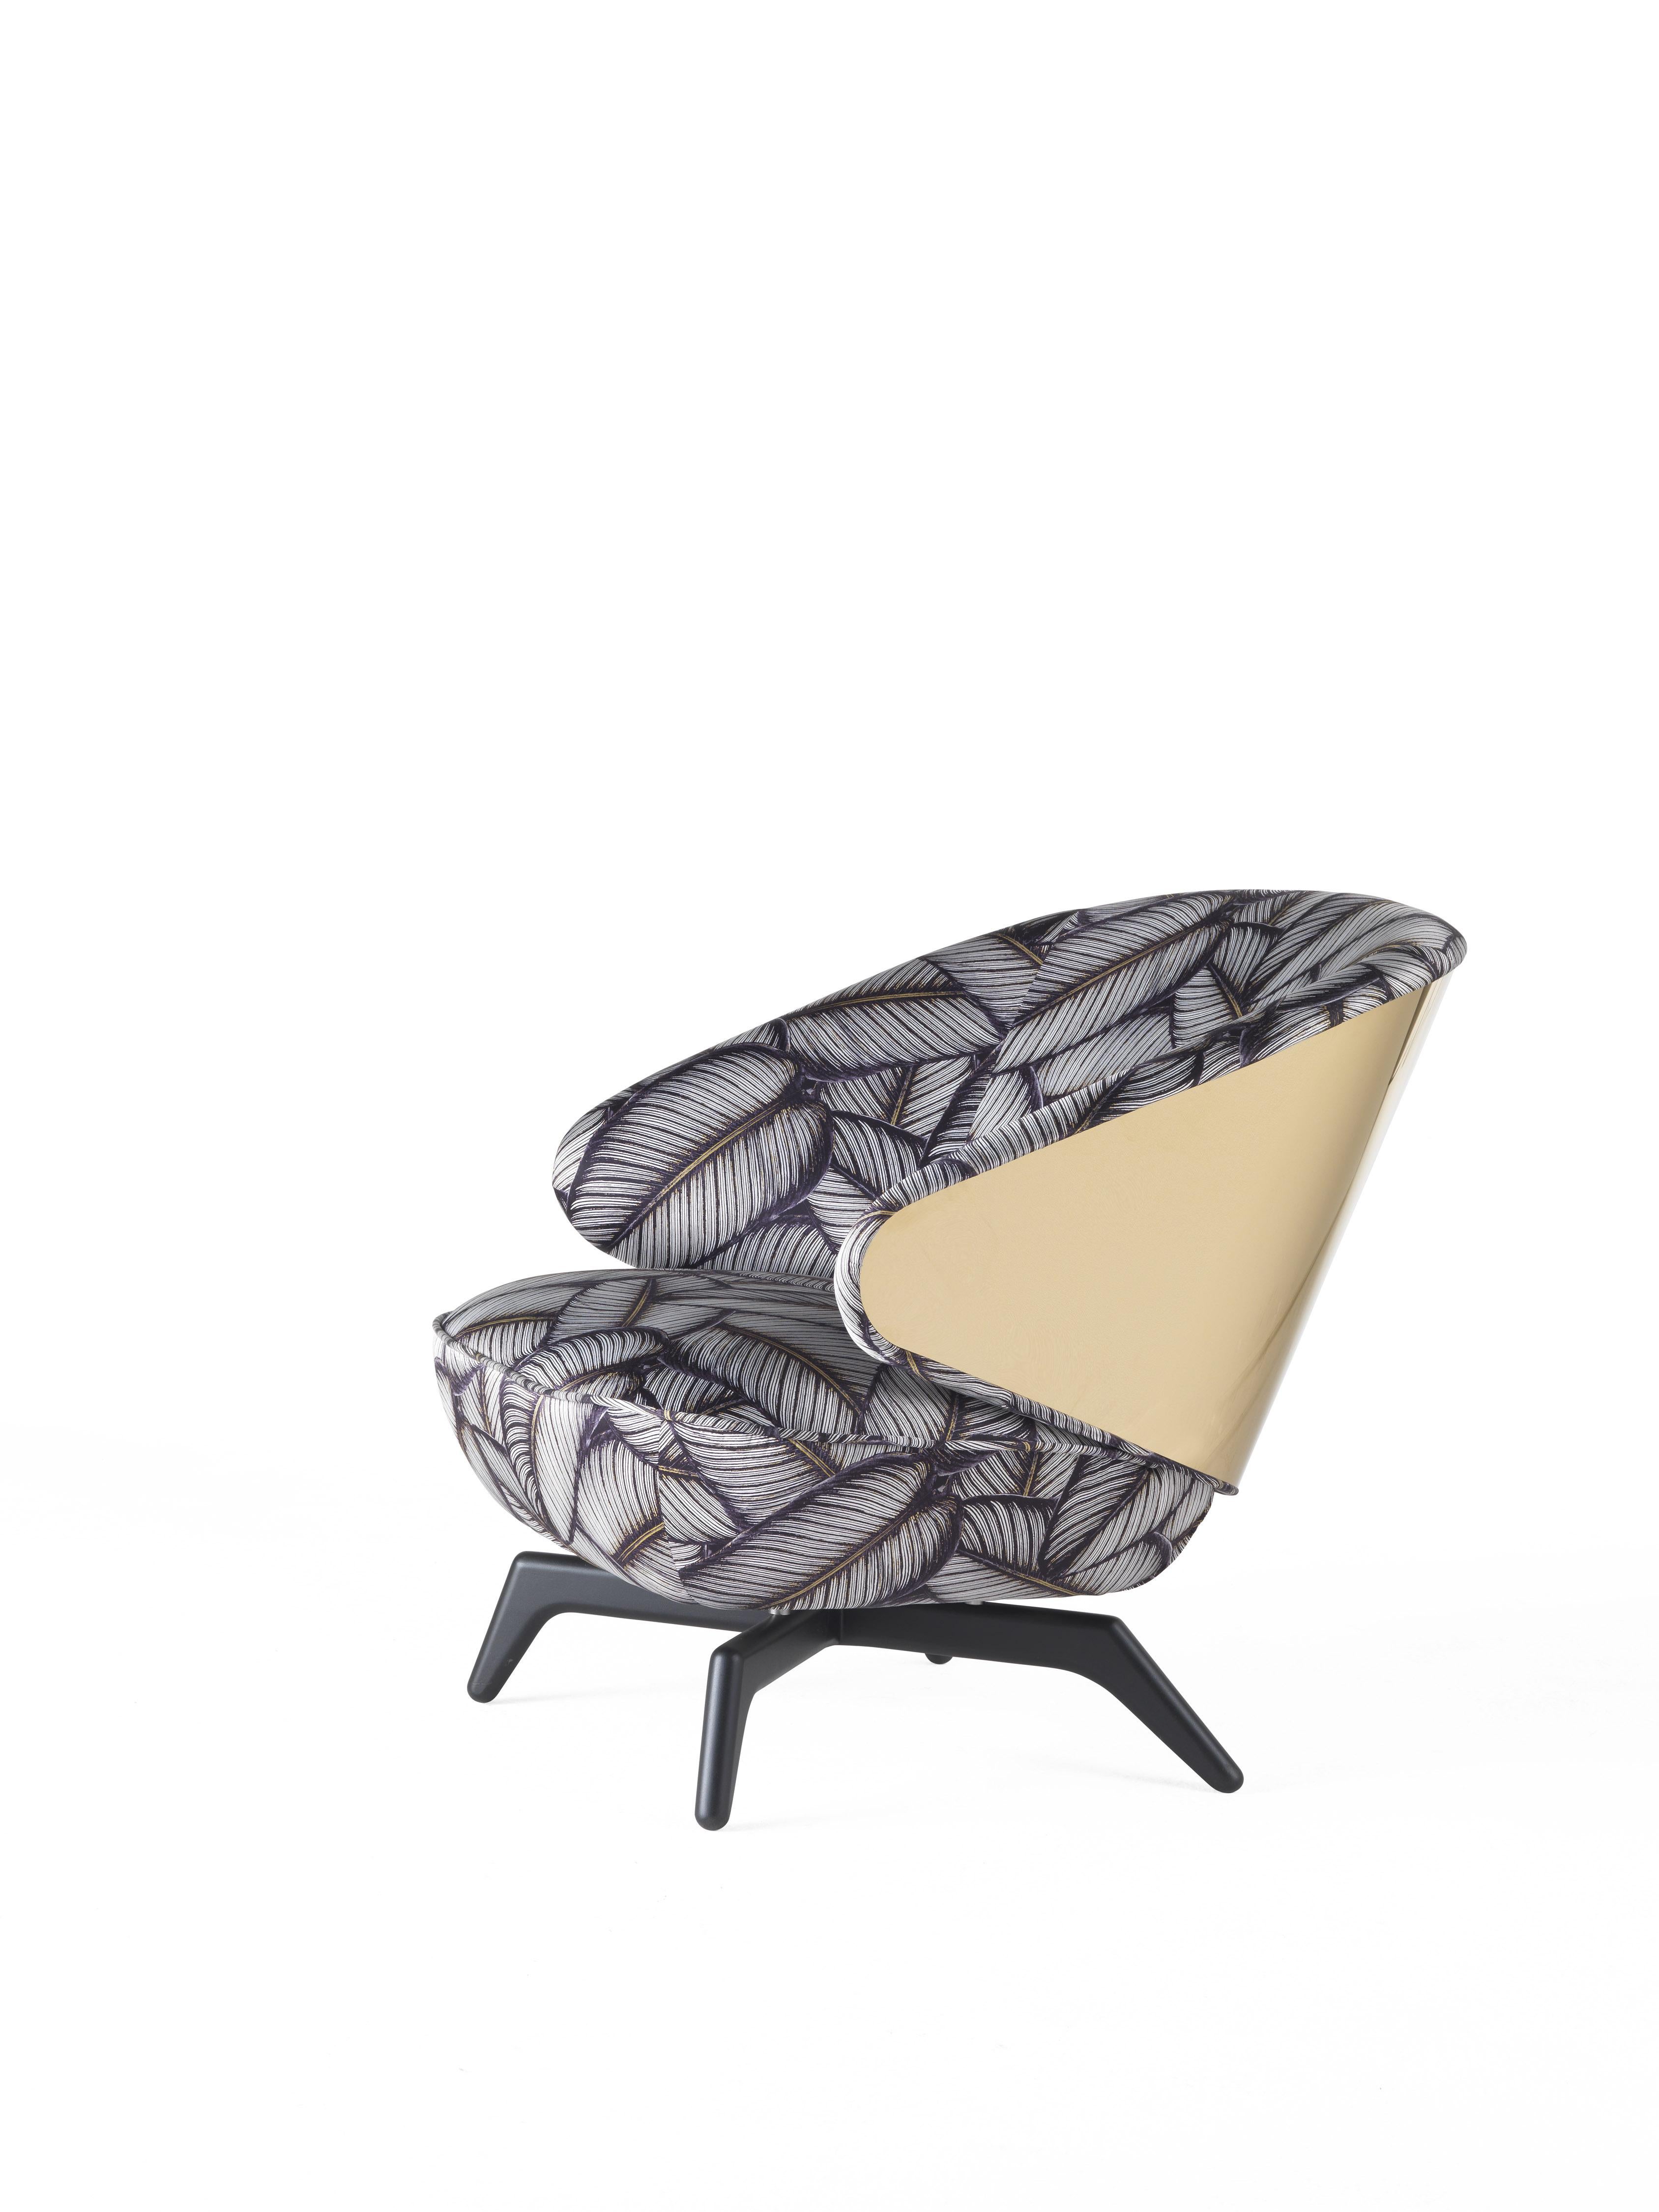 New and appealing design for the Key West armchair. Featuring sinuous and rounded shapes, it has an enveloping seatback in polished golden metal and a comfortable seat. Sensuality, warmth and charm: the perfect ingredients to create a seductive and